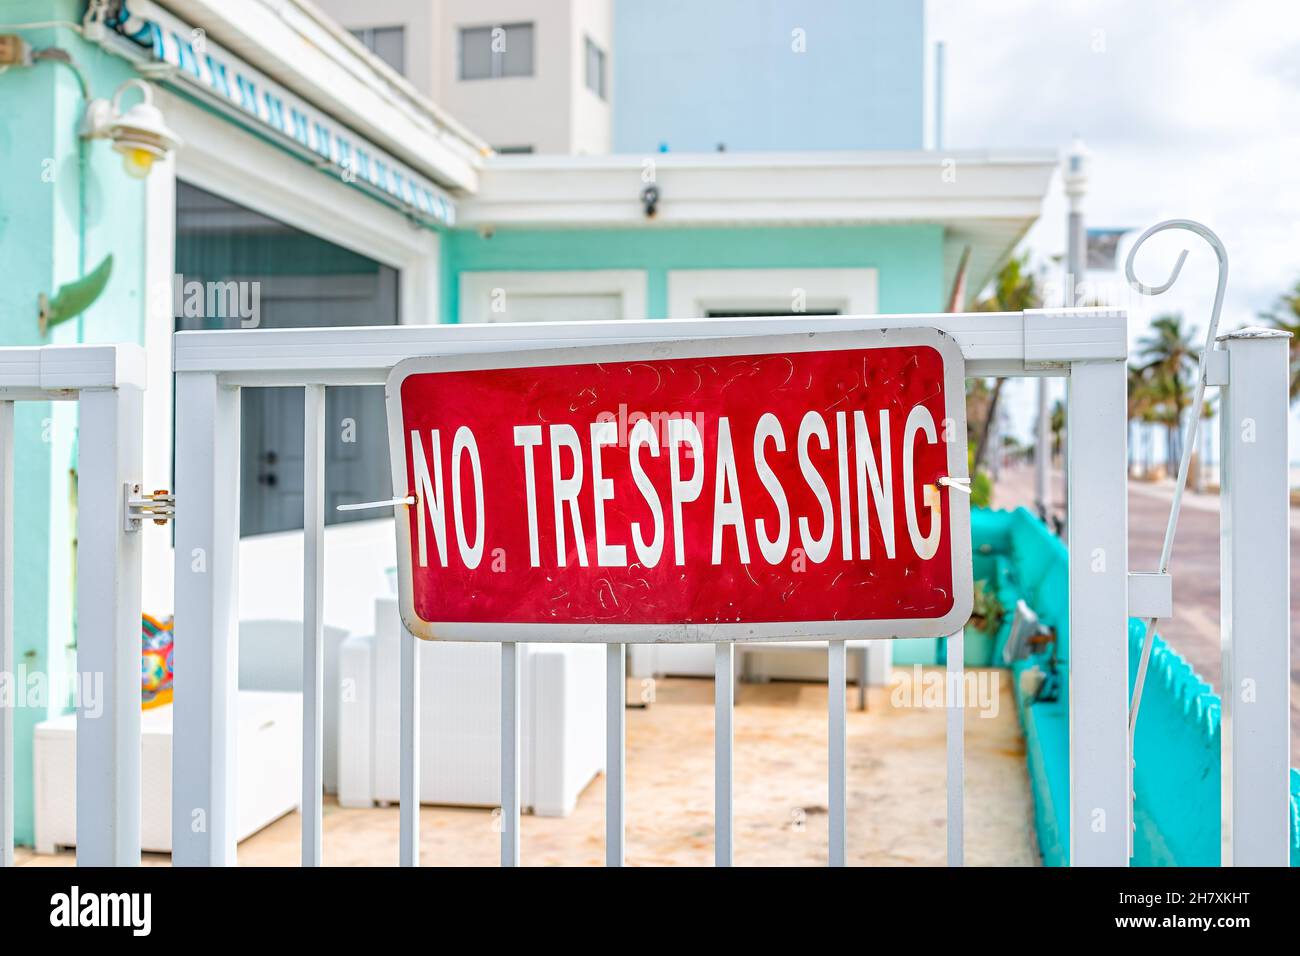 Hollywood, Miami Beach broadwalk in Florida and no trespassing sign art deco colorful apartment house building with turquoise green blue architecture Stock Photo